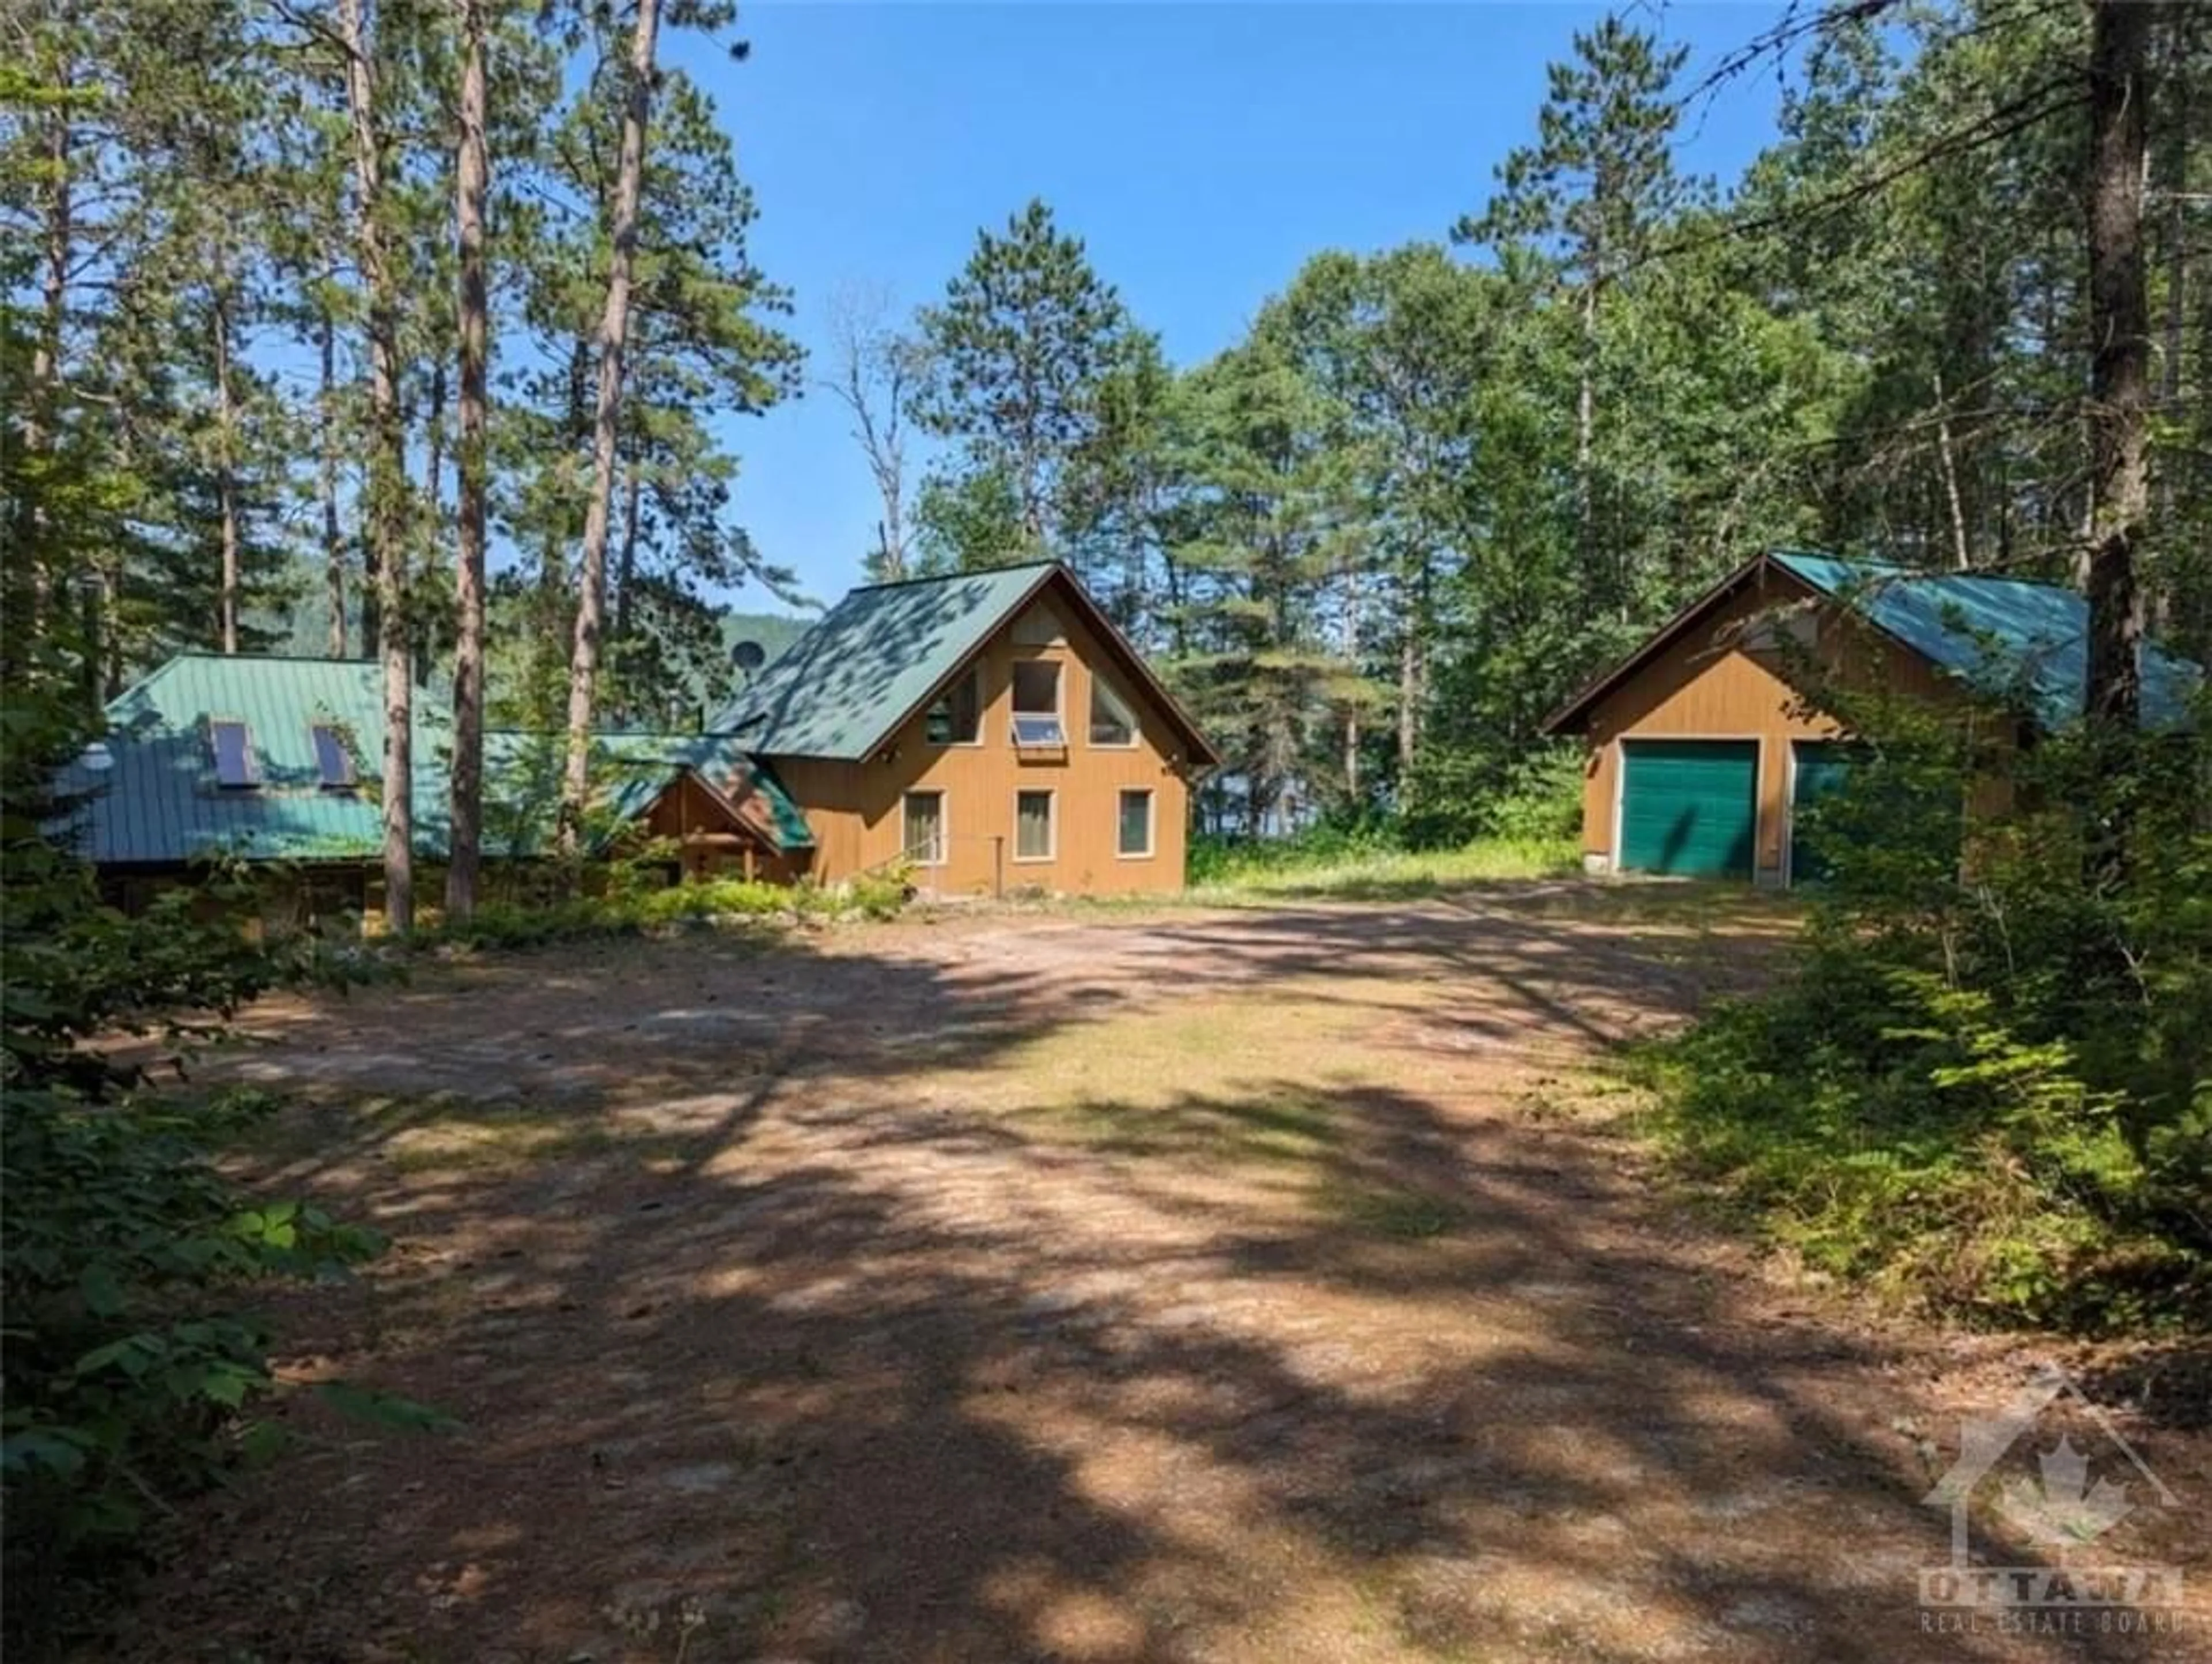 Cottage for 35692 17 Hwy, Deep River Ontario K0J 1P0